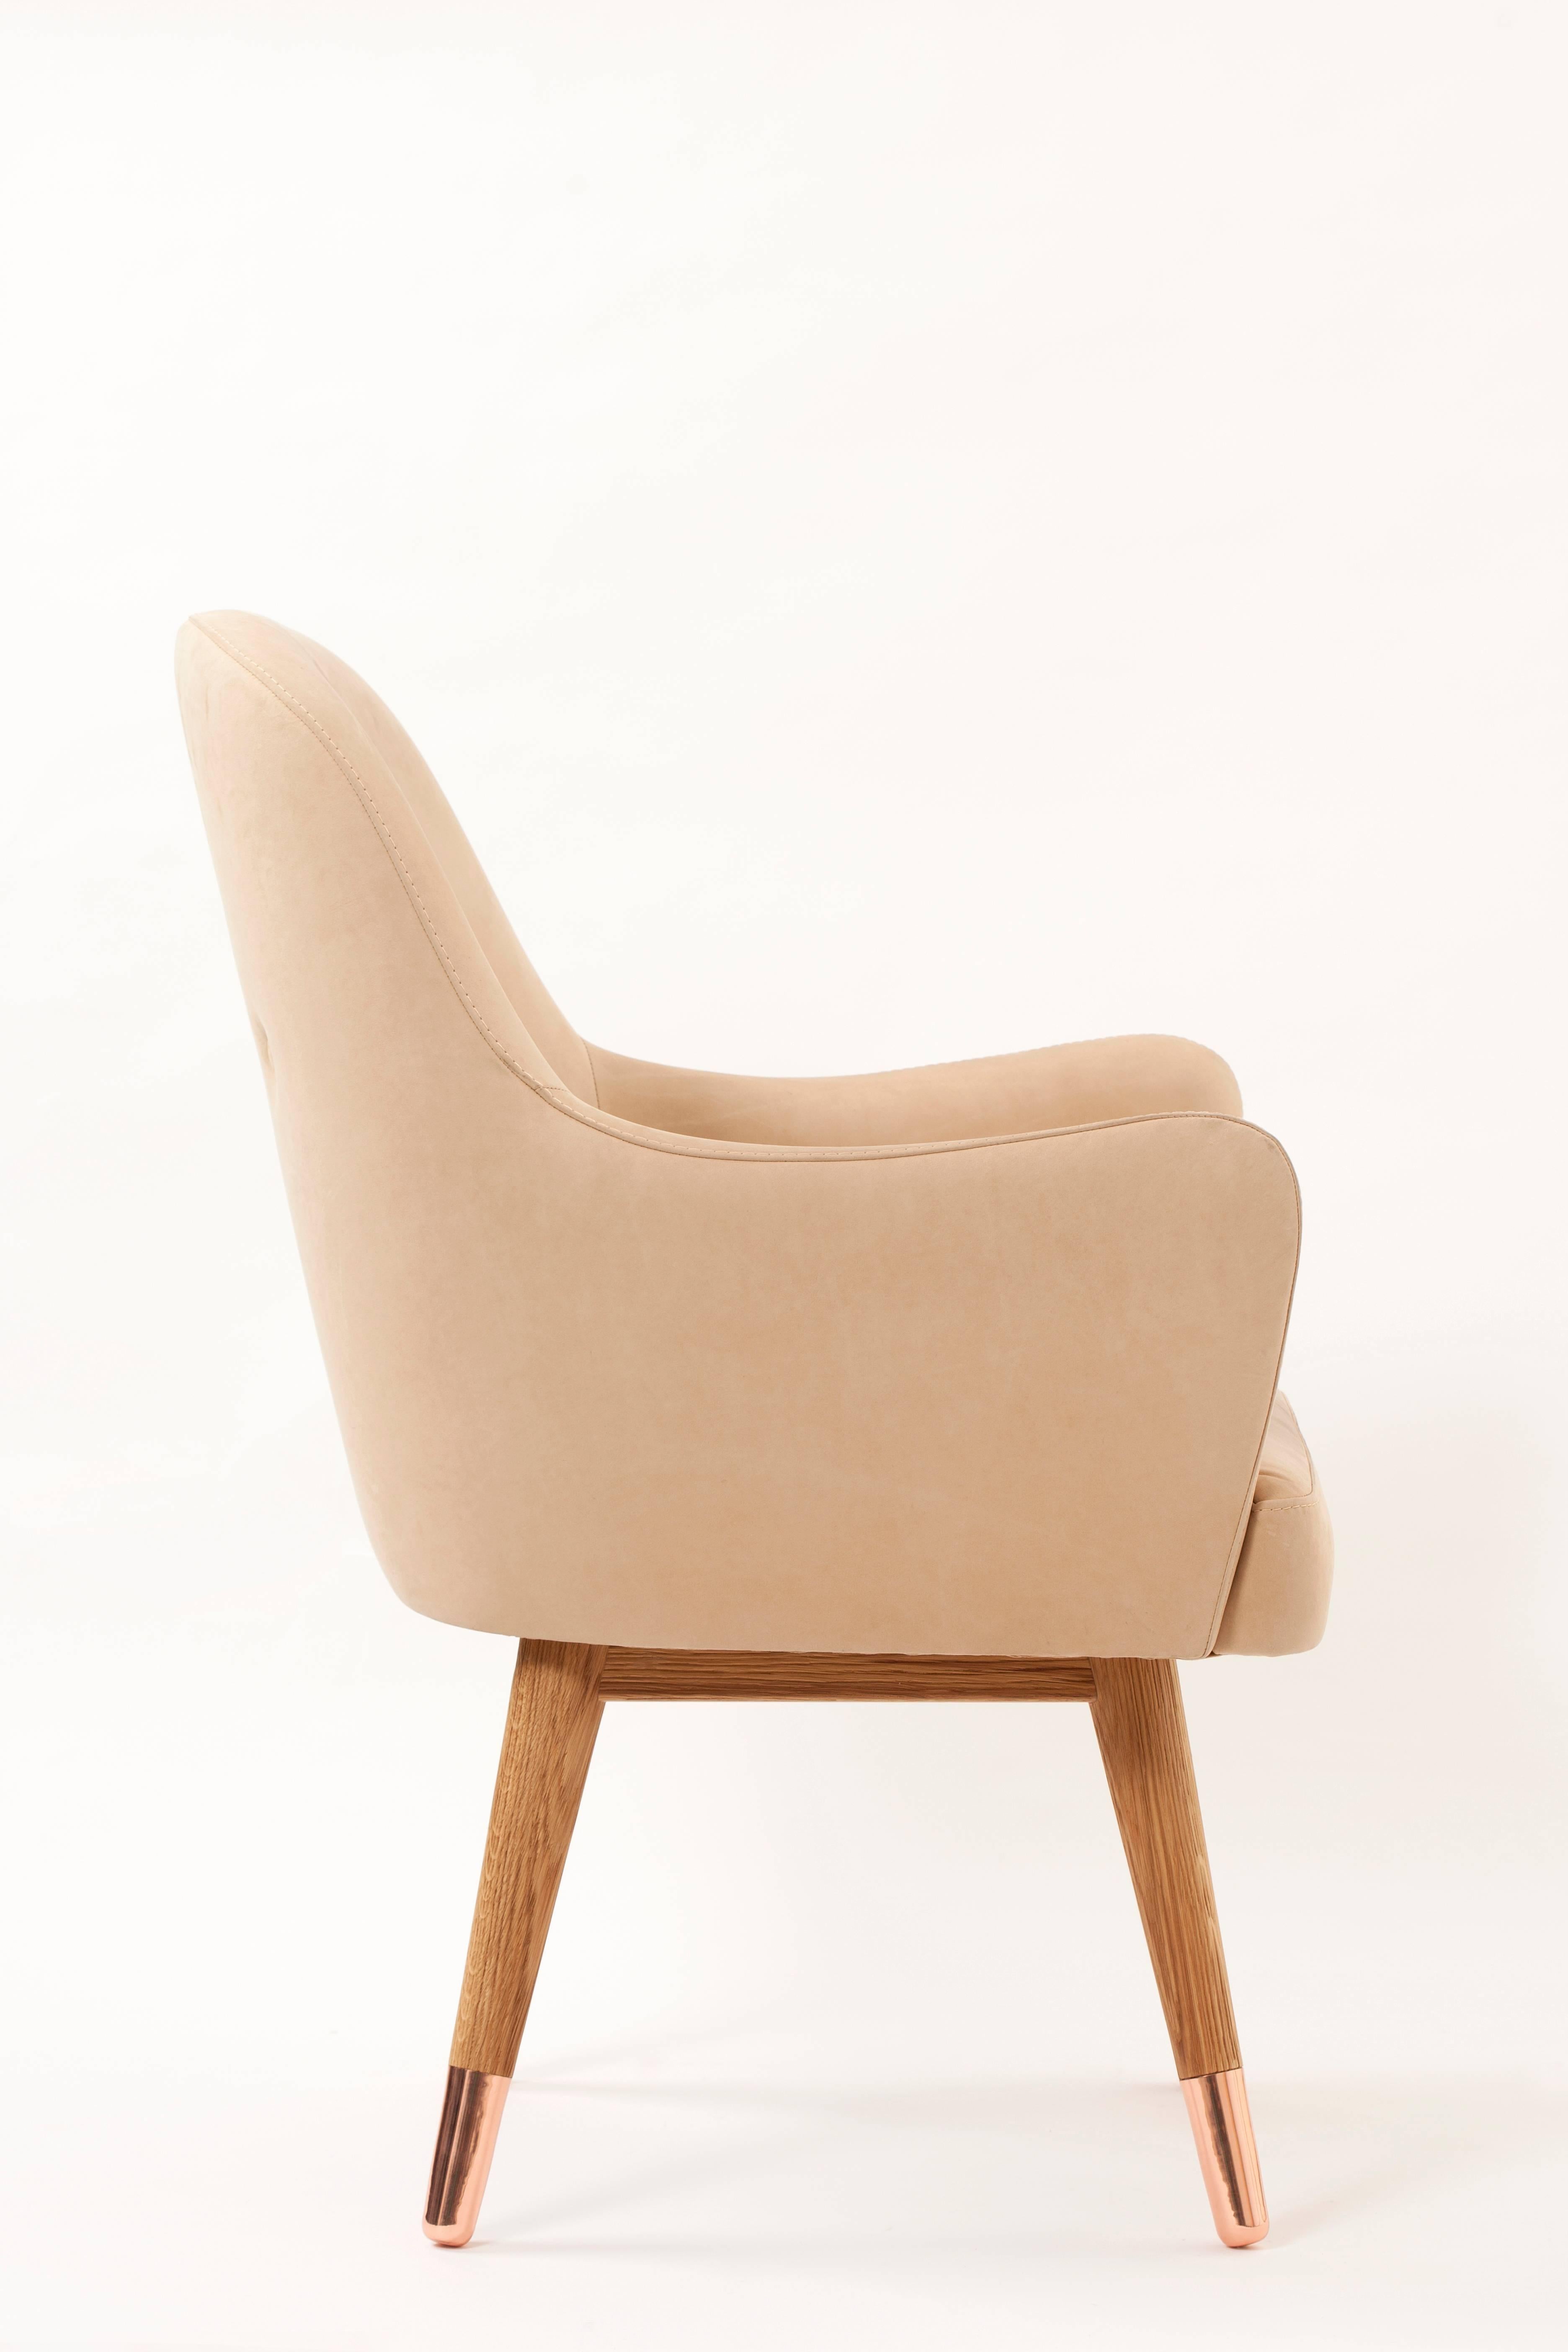 Thanks to its curved structure and smooth suede leather upholstery, Dandy offers a comfortable, relaxing environment to its users. Combination of light colors and natural materials makes Dandy suitable for different spaces. The special suede leather